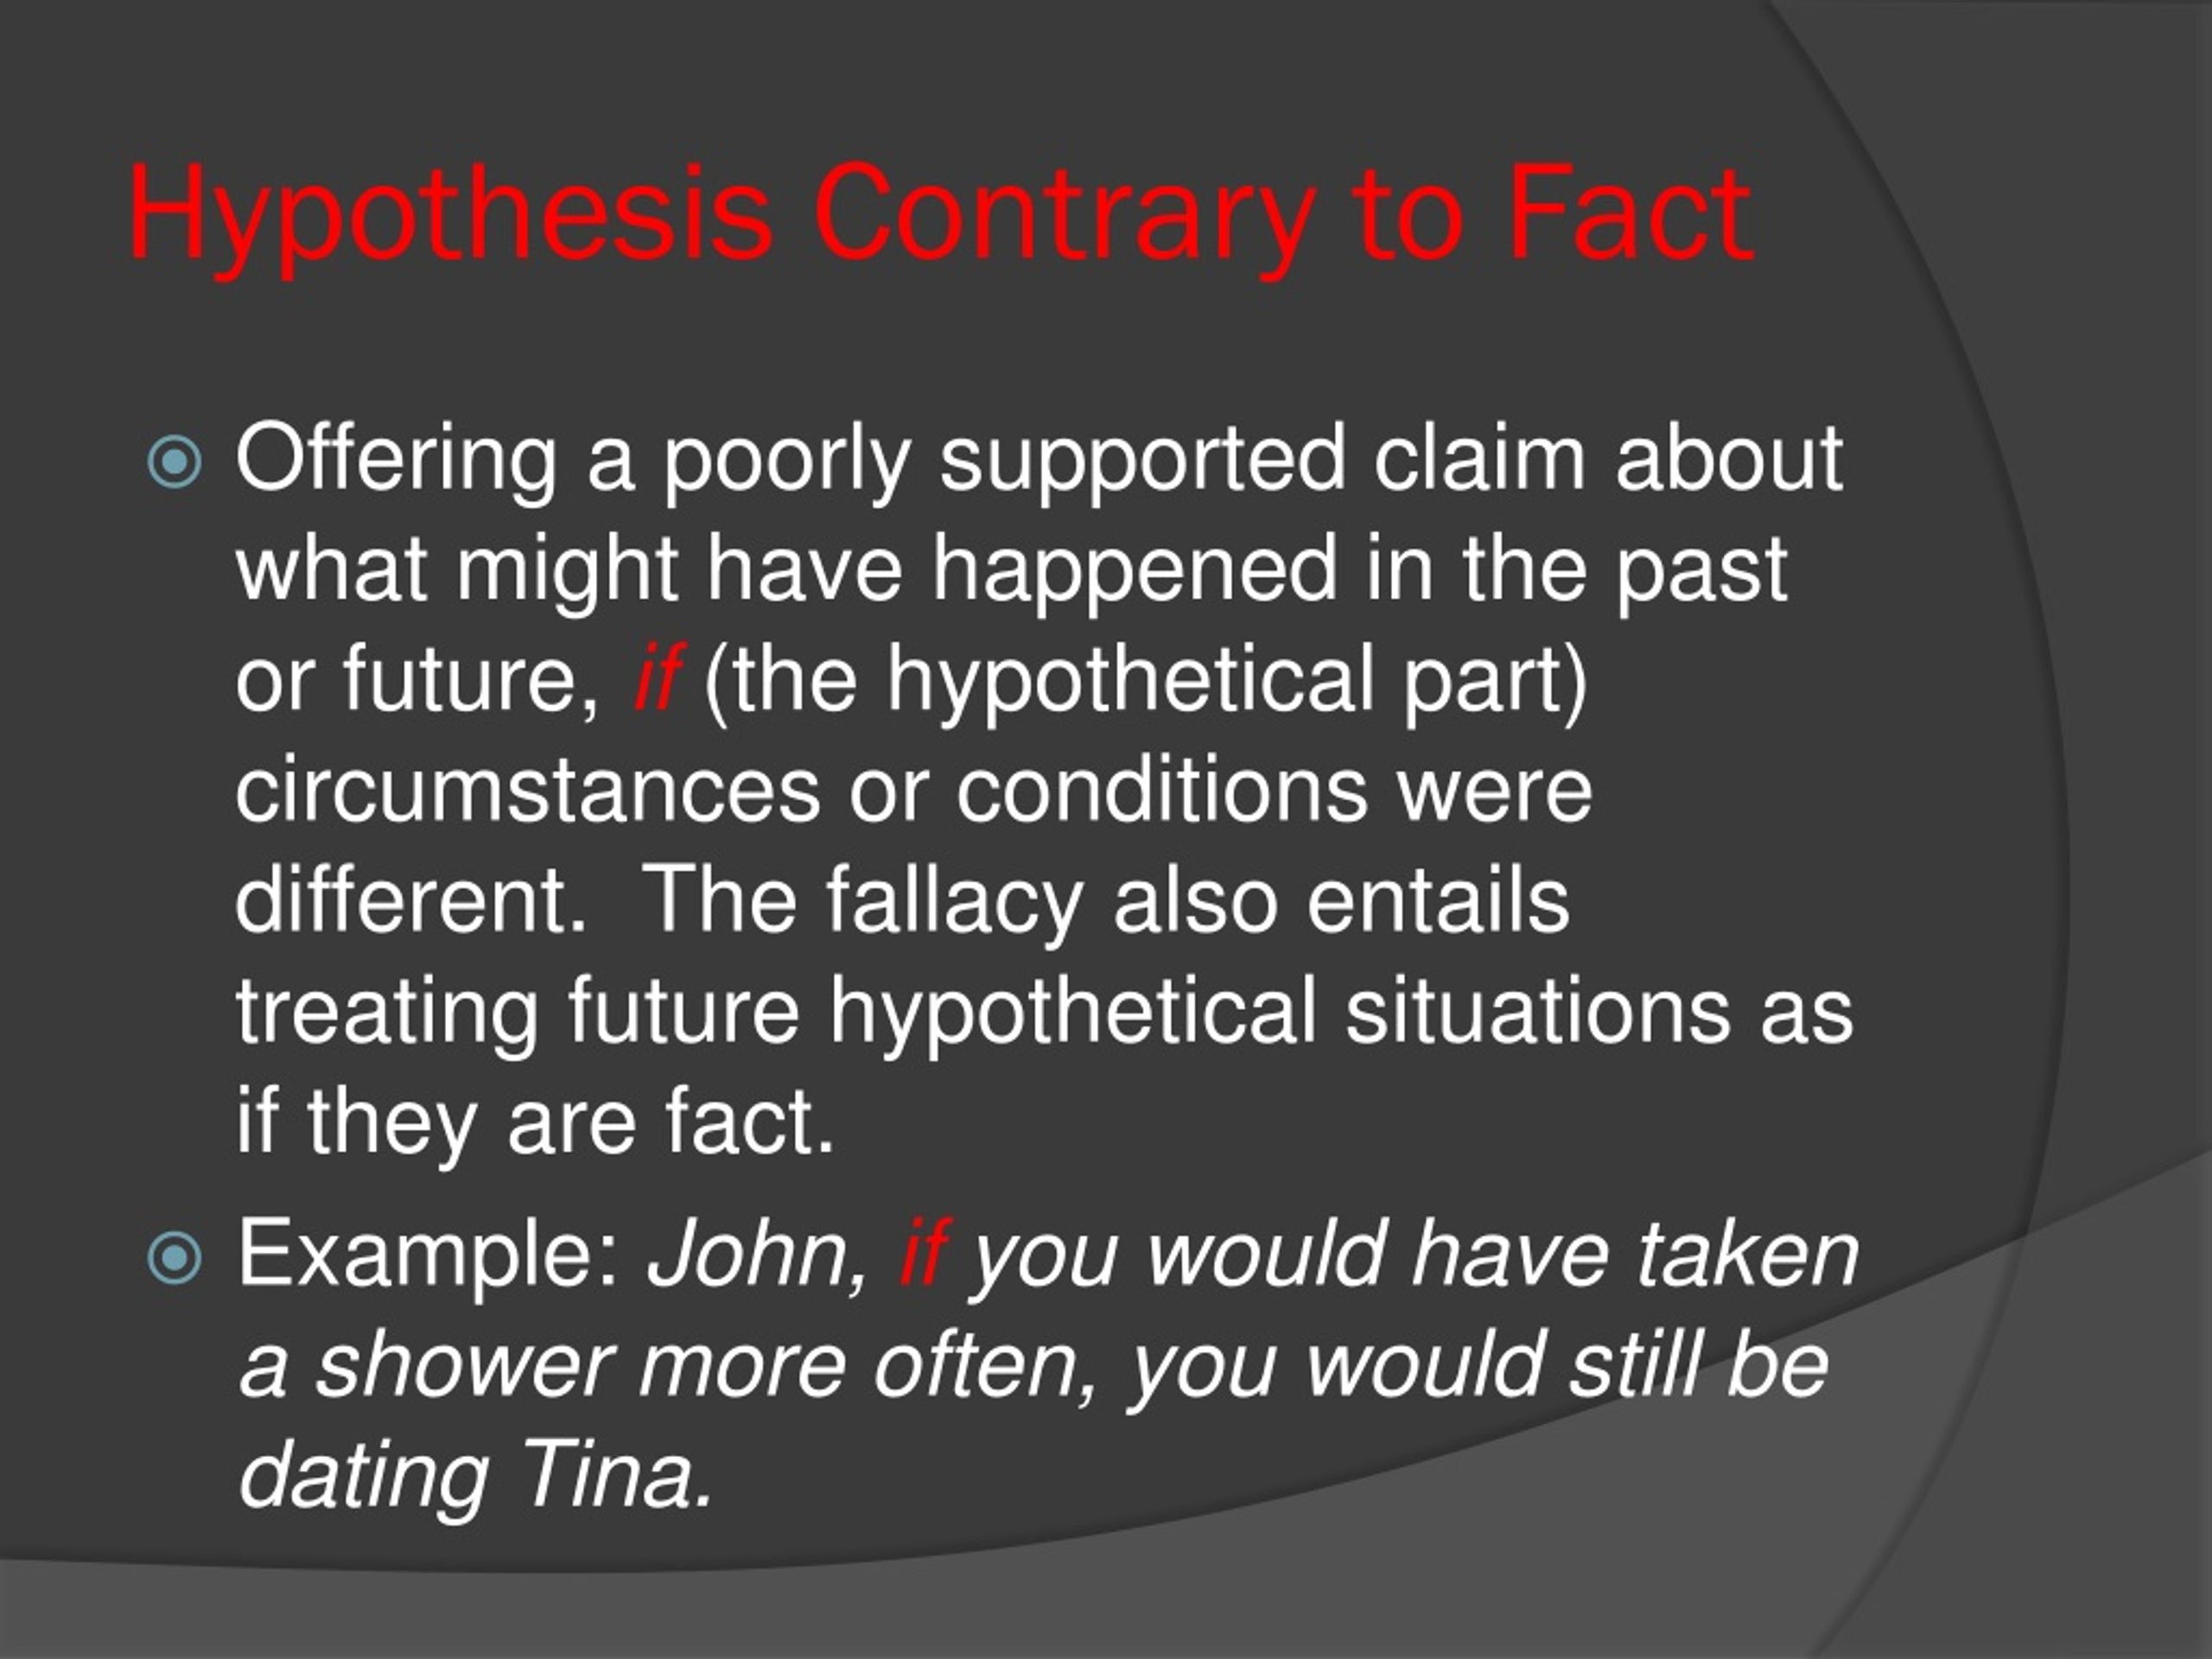 hypothesis contrary to fact examples in media